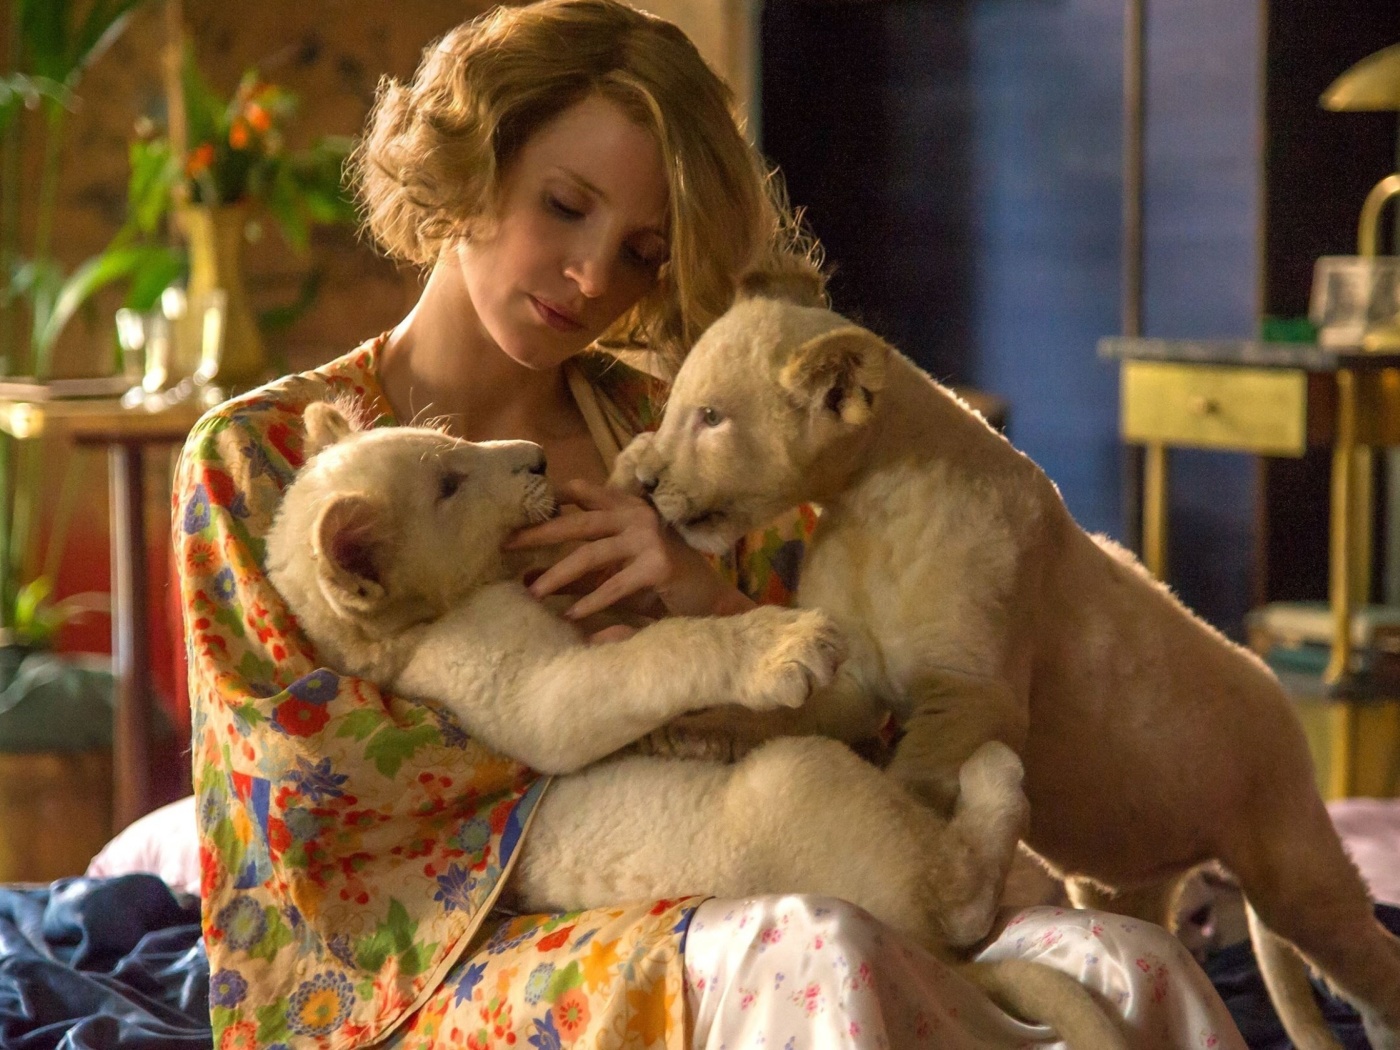 The Zookeepers Wife Film with Jessica Chastain wallpaper 1400x1050